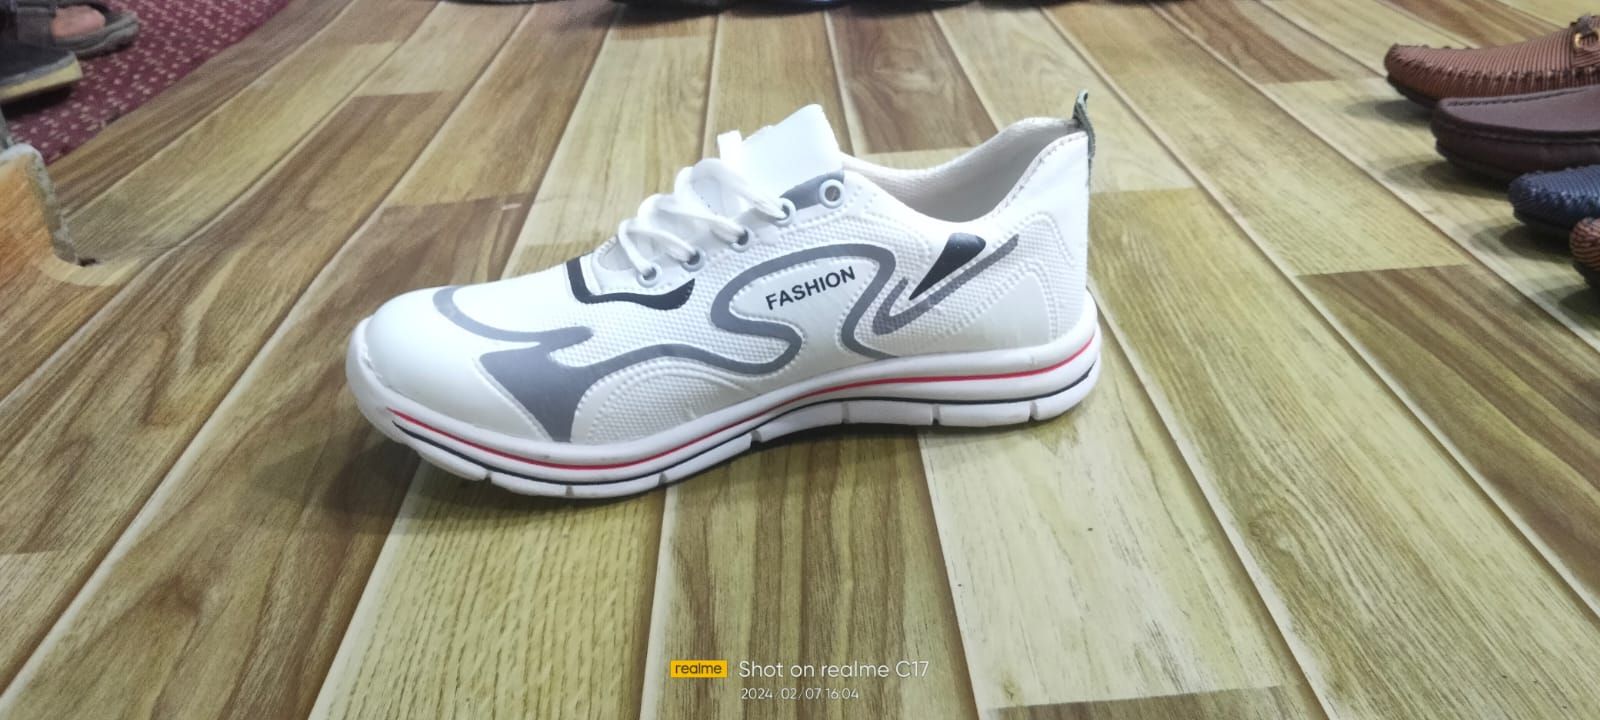 White Sneakers For Men White Shoes For Man Party Shoes Men Slip-on Shoes White Shoes For Men White Trainers For Men